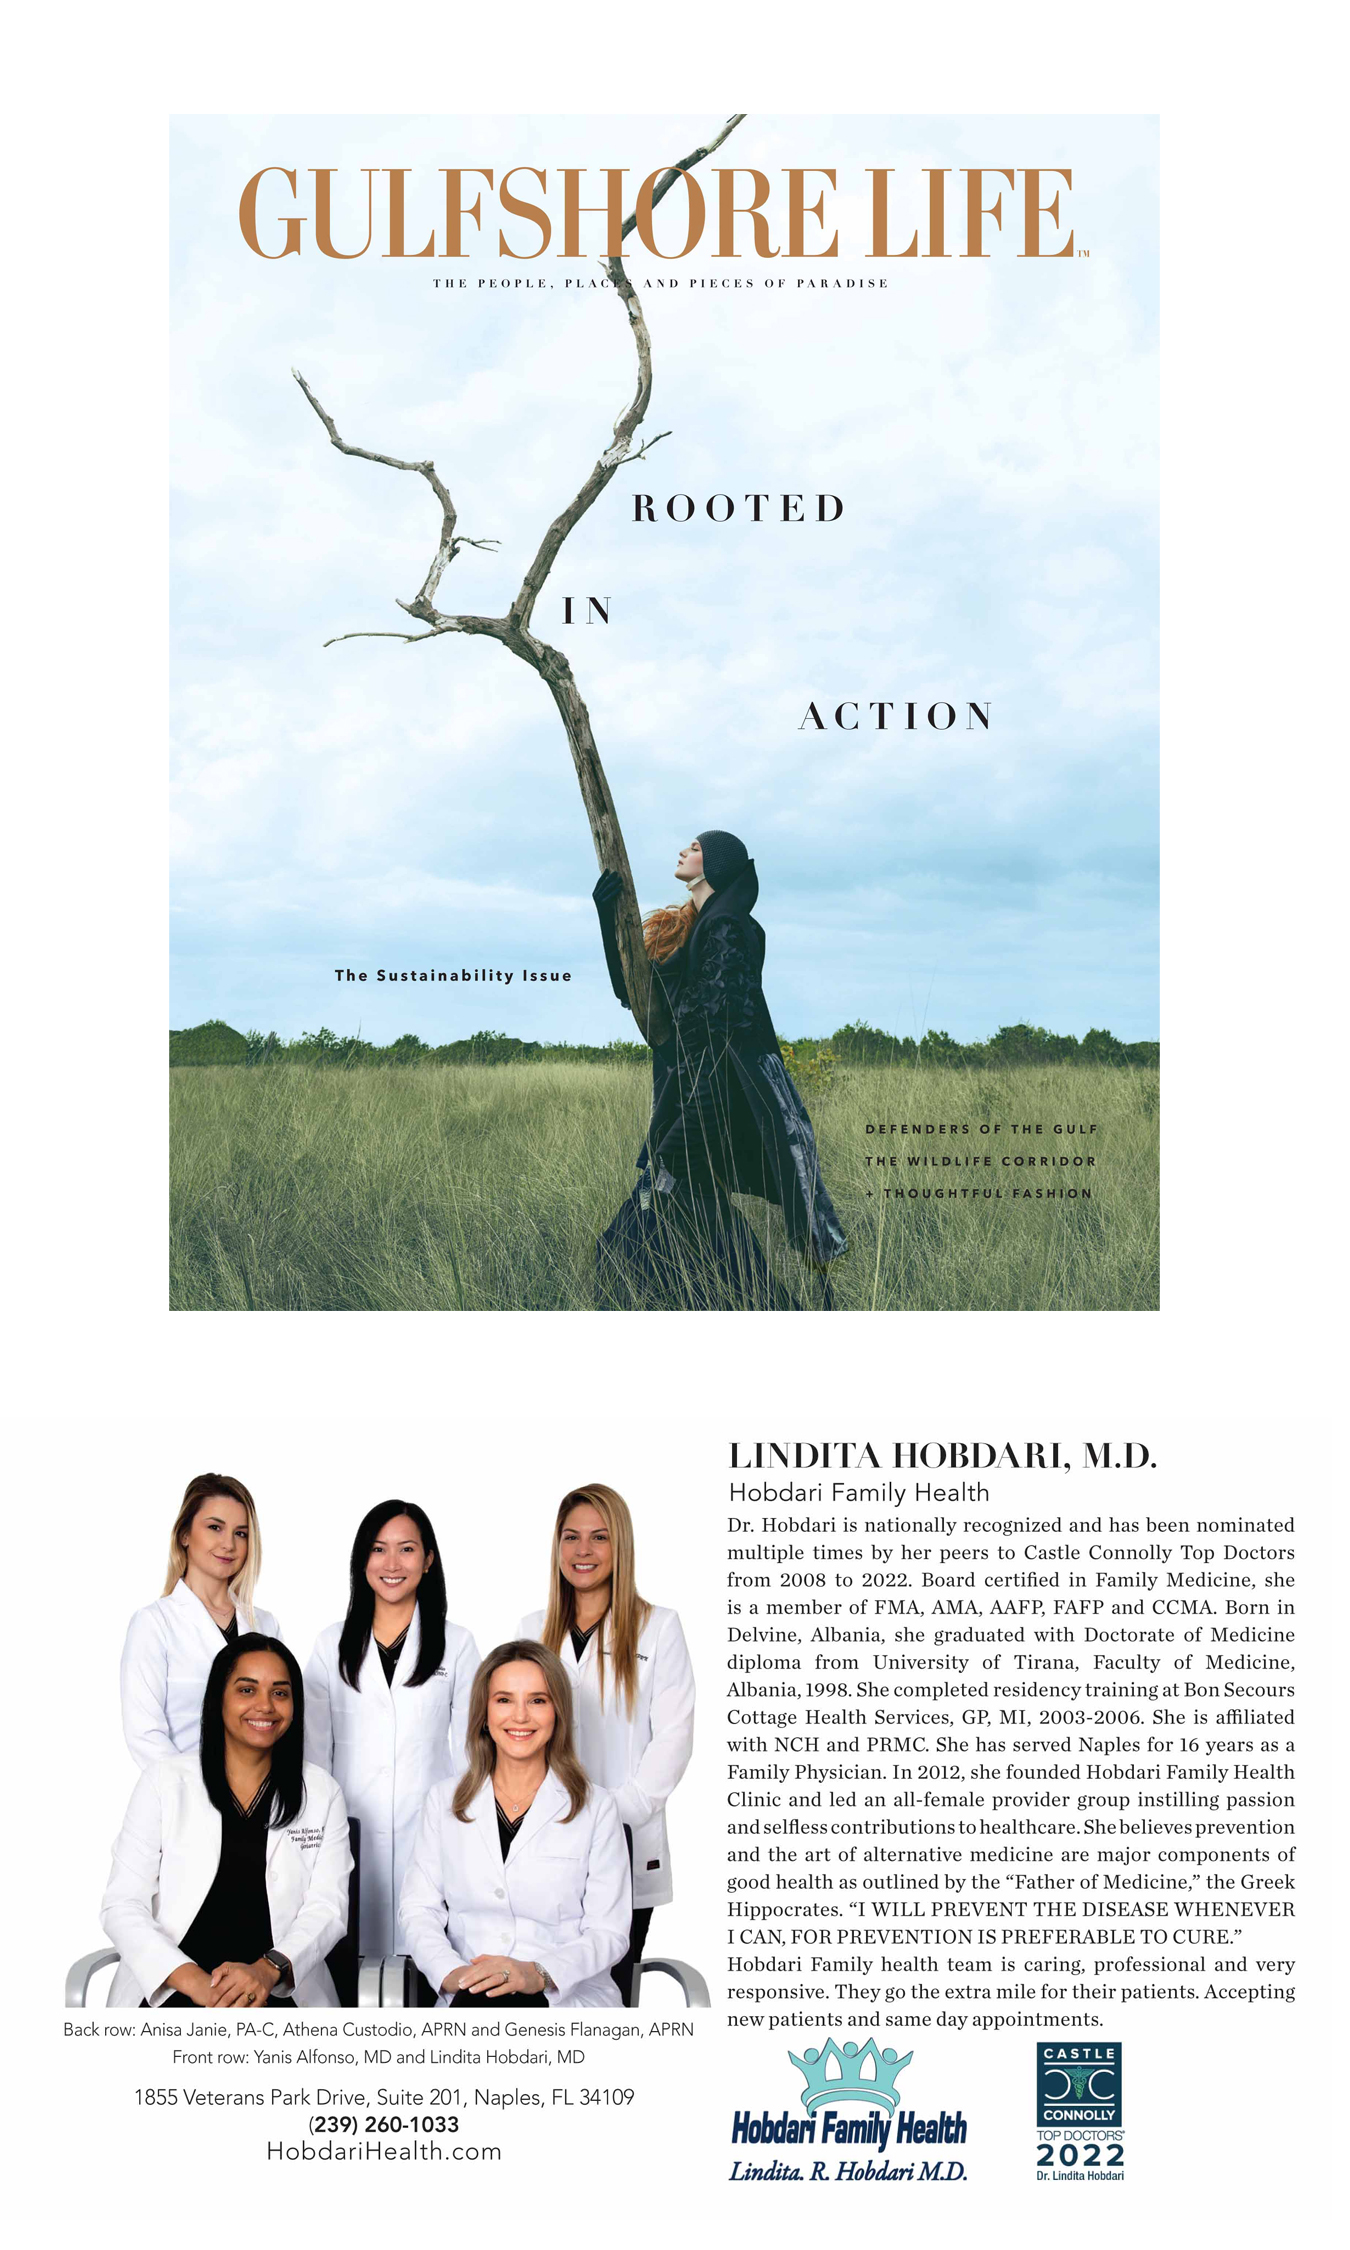 Featured in “Gulfshore Life Magazine” – APRIL 2022